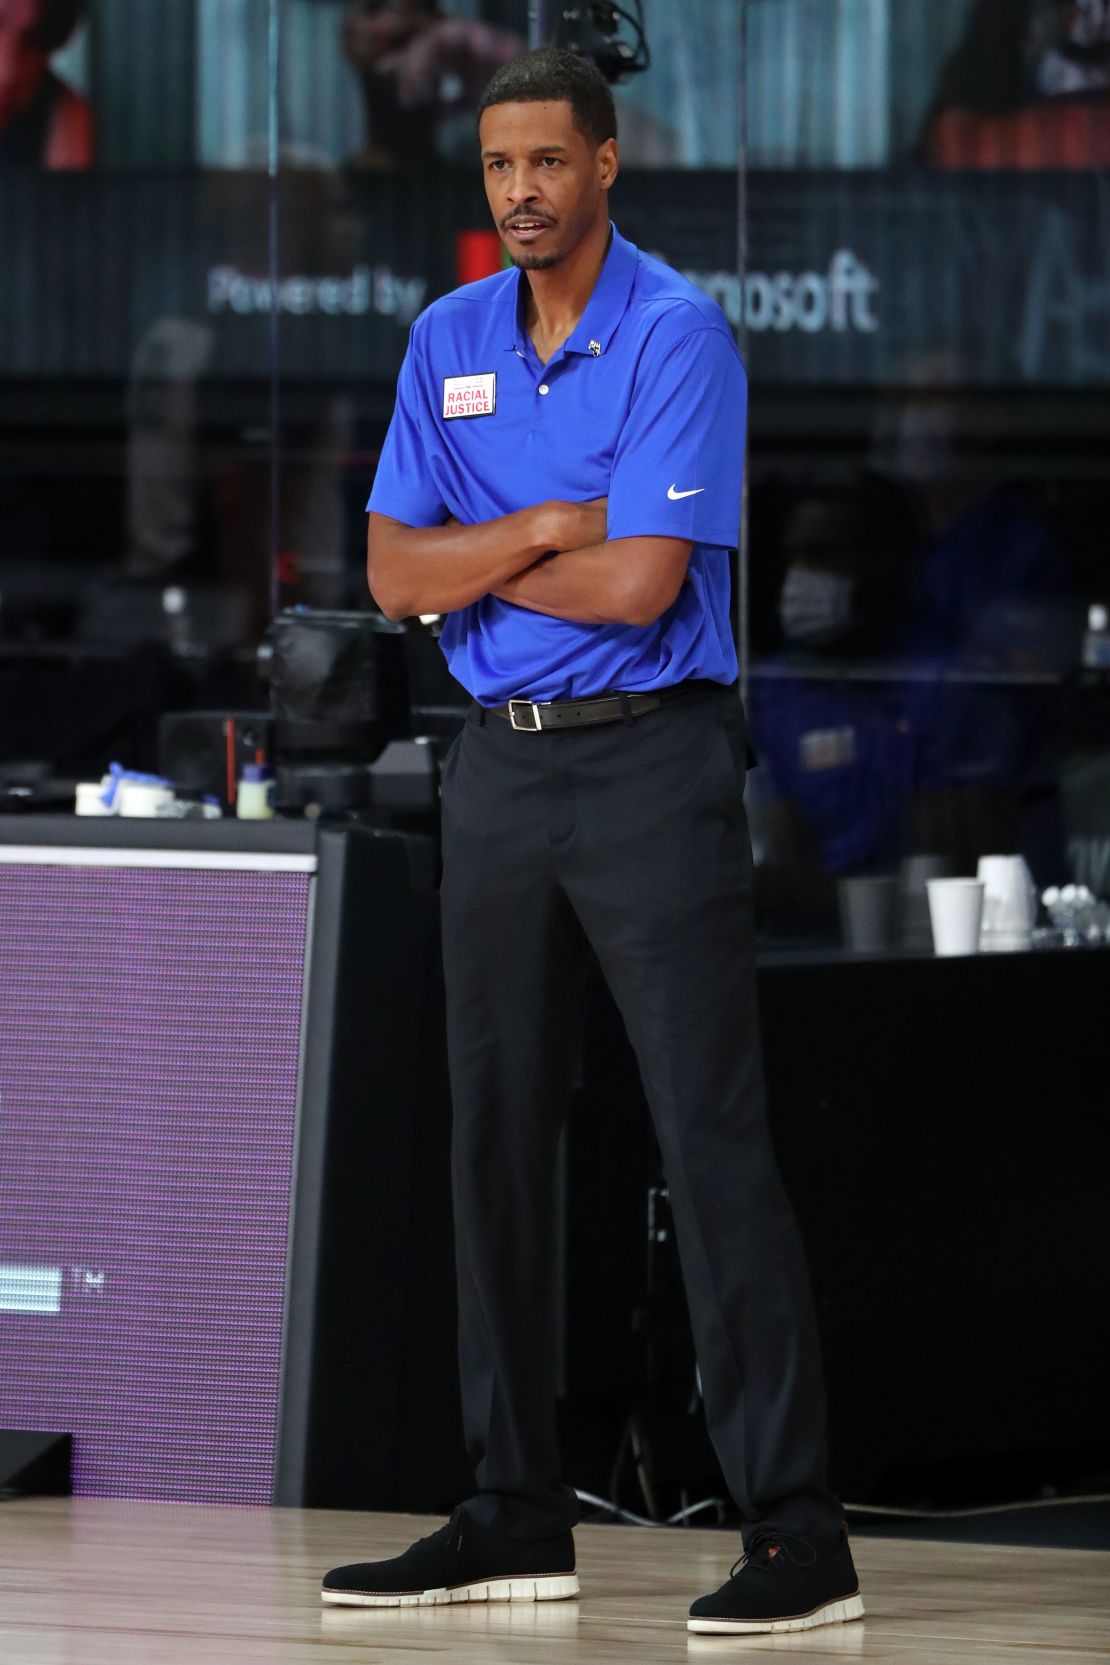 Stephen Silas is in his first year as a head coach at the Rockets, but was previously an assistant coach at the Dallas Mavericks for two years.